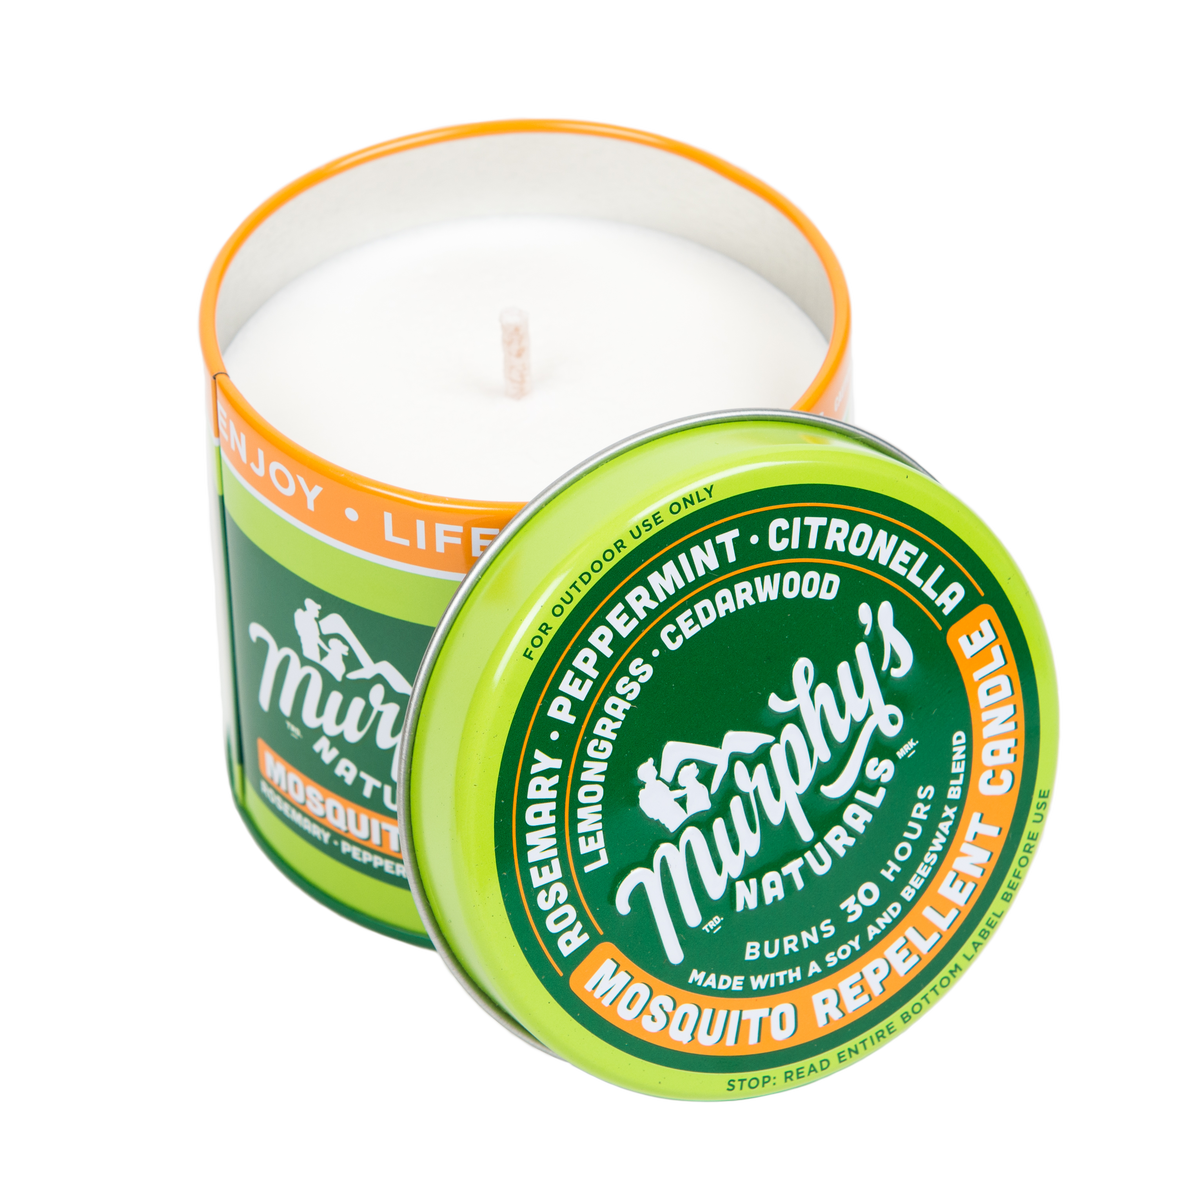 Murphy's Mosquito Repellent Candle